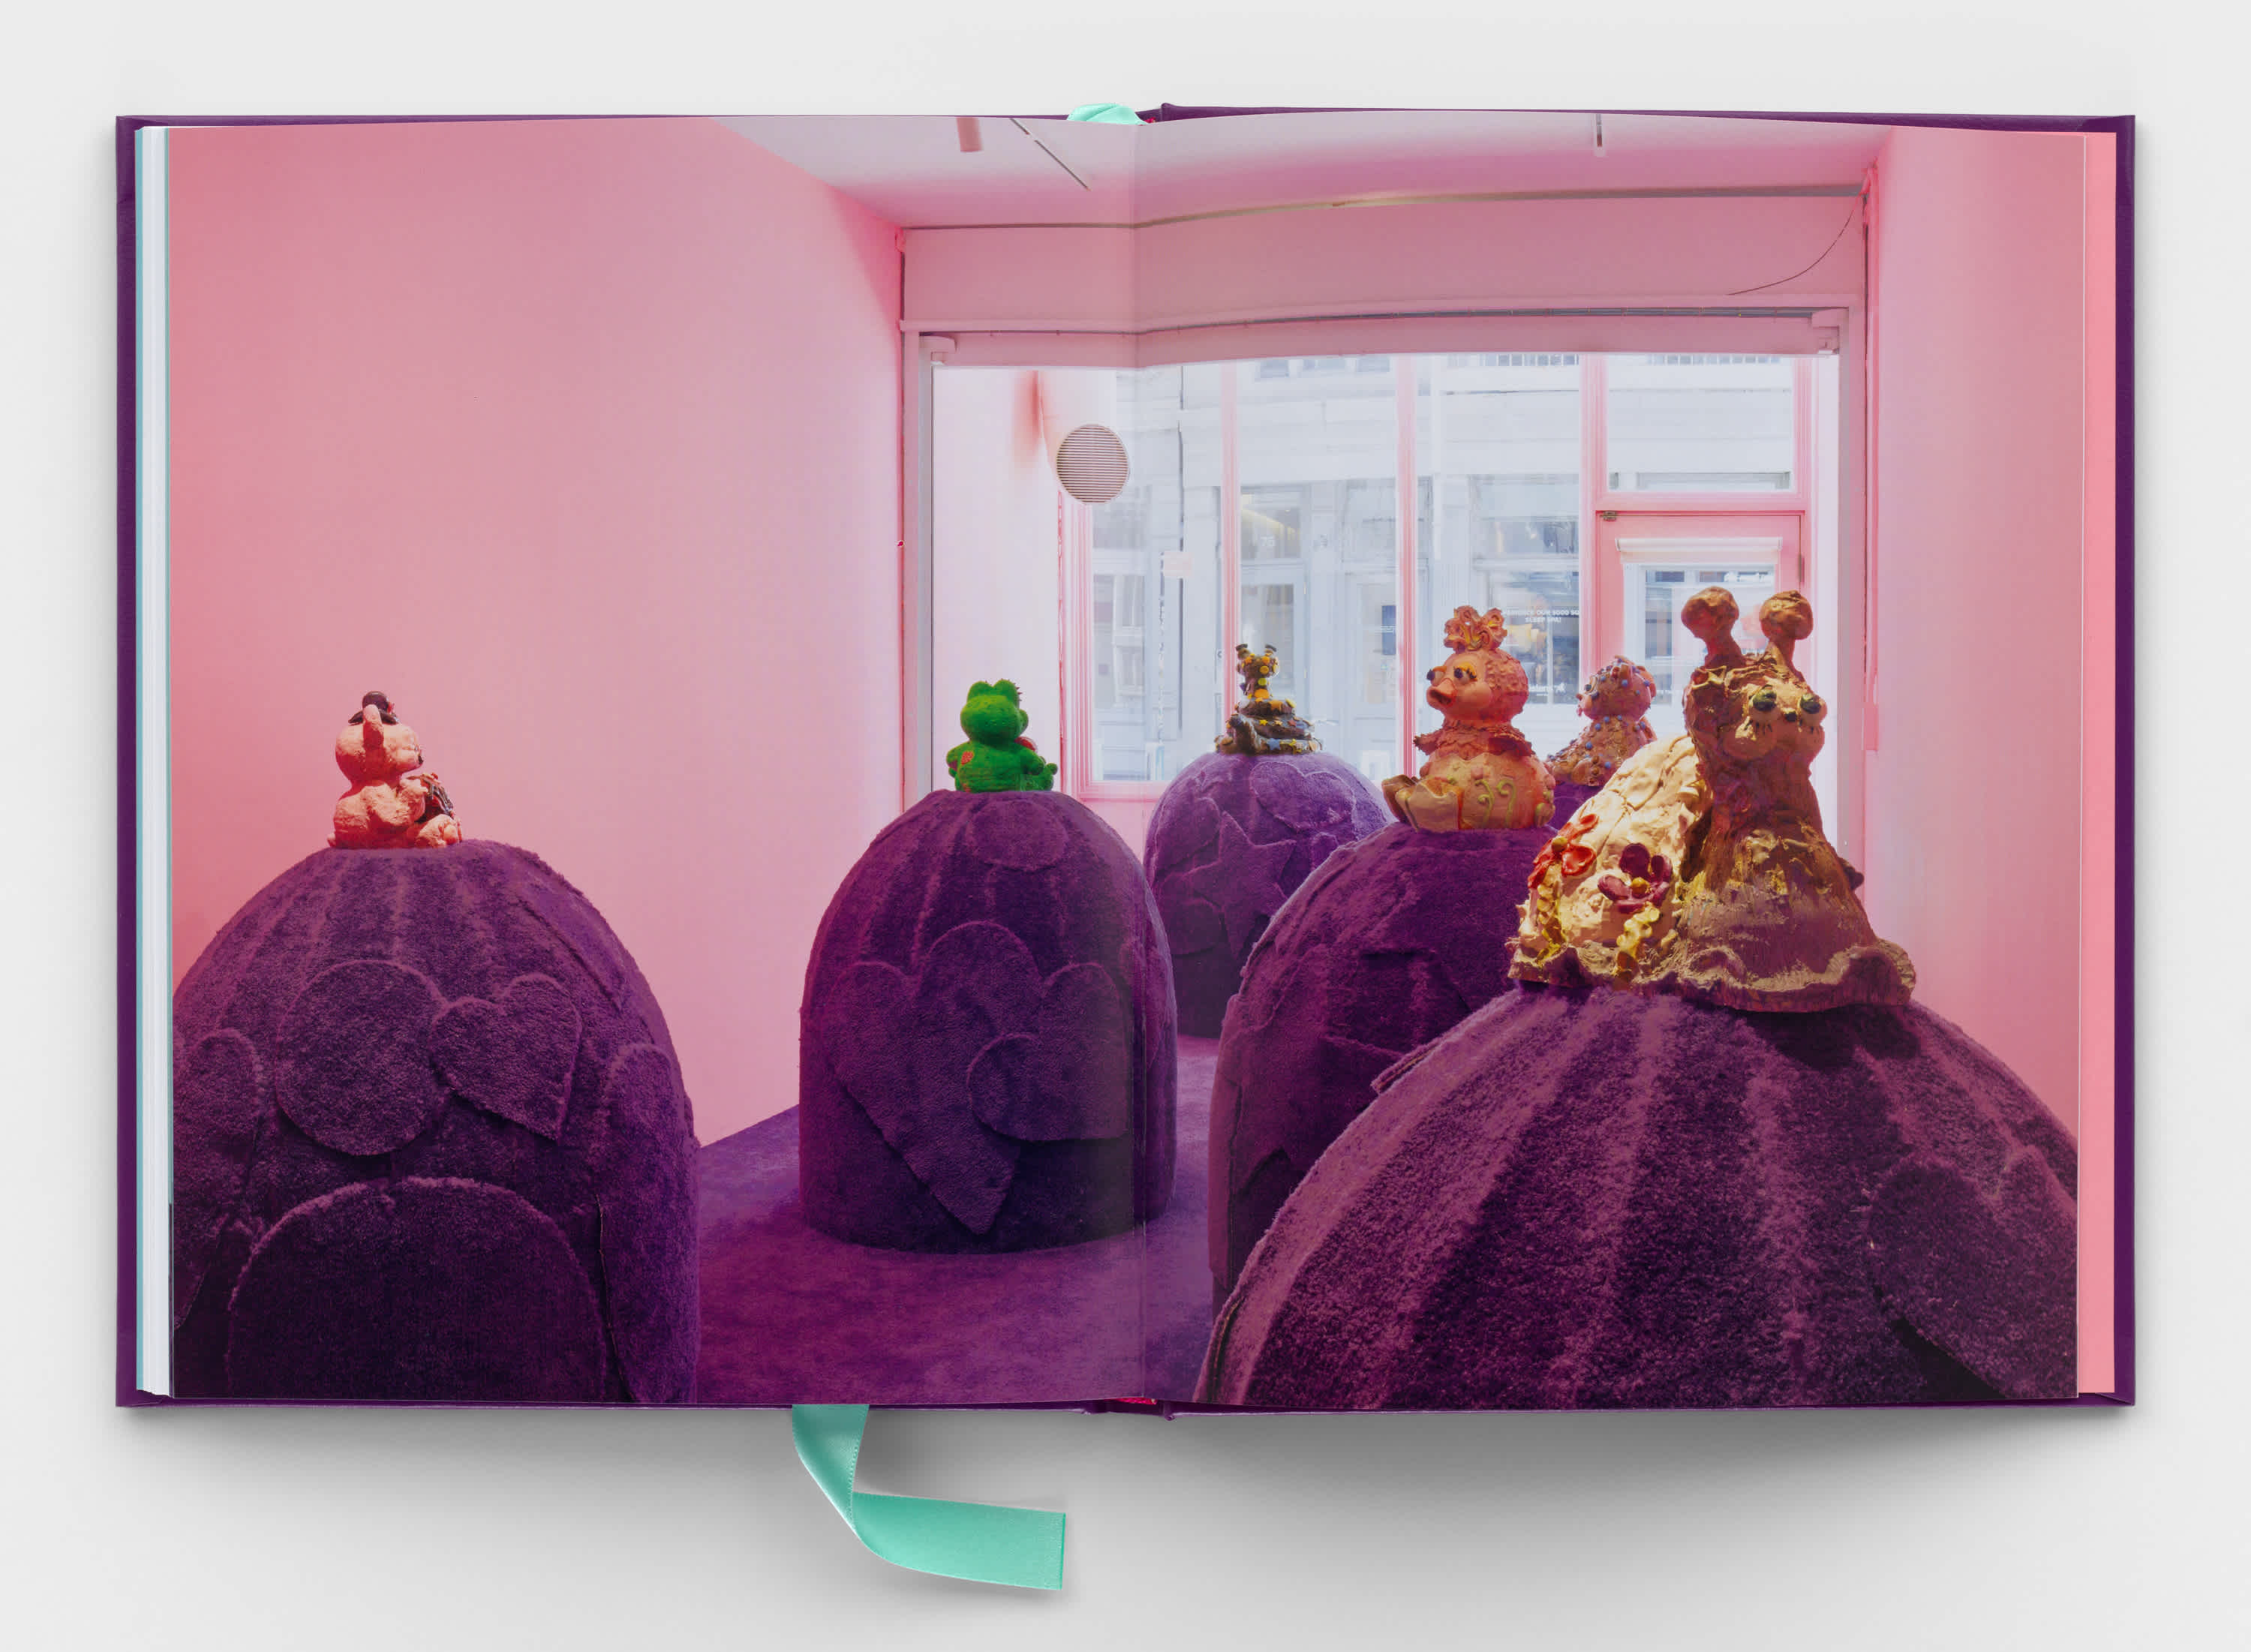 A book centerfold that shows a full bleed image of an exhibition. Several large purple carpet mounds rise up out of the floor. A colorful cartoon creature sits atop each mound. A wall of windows in the background looks out onto the street. The walls are pink.